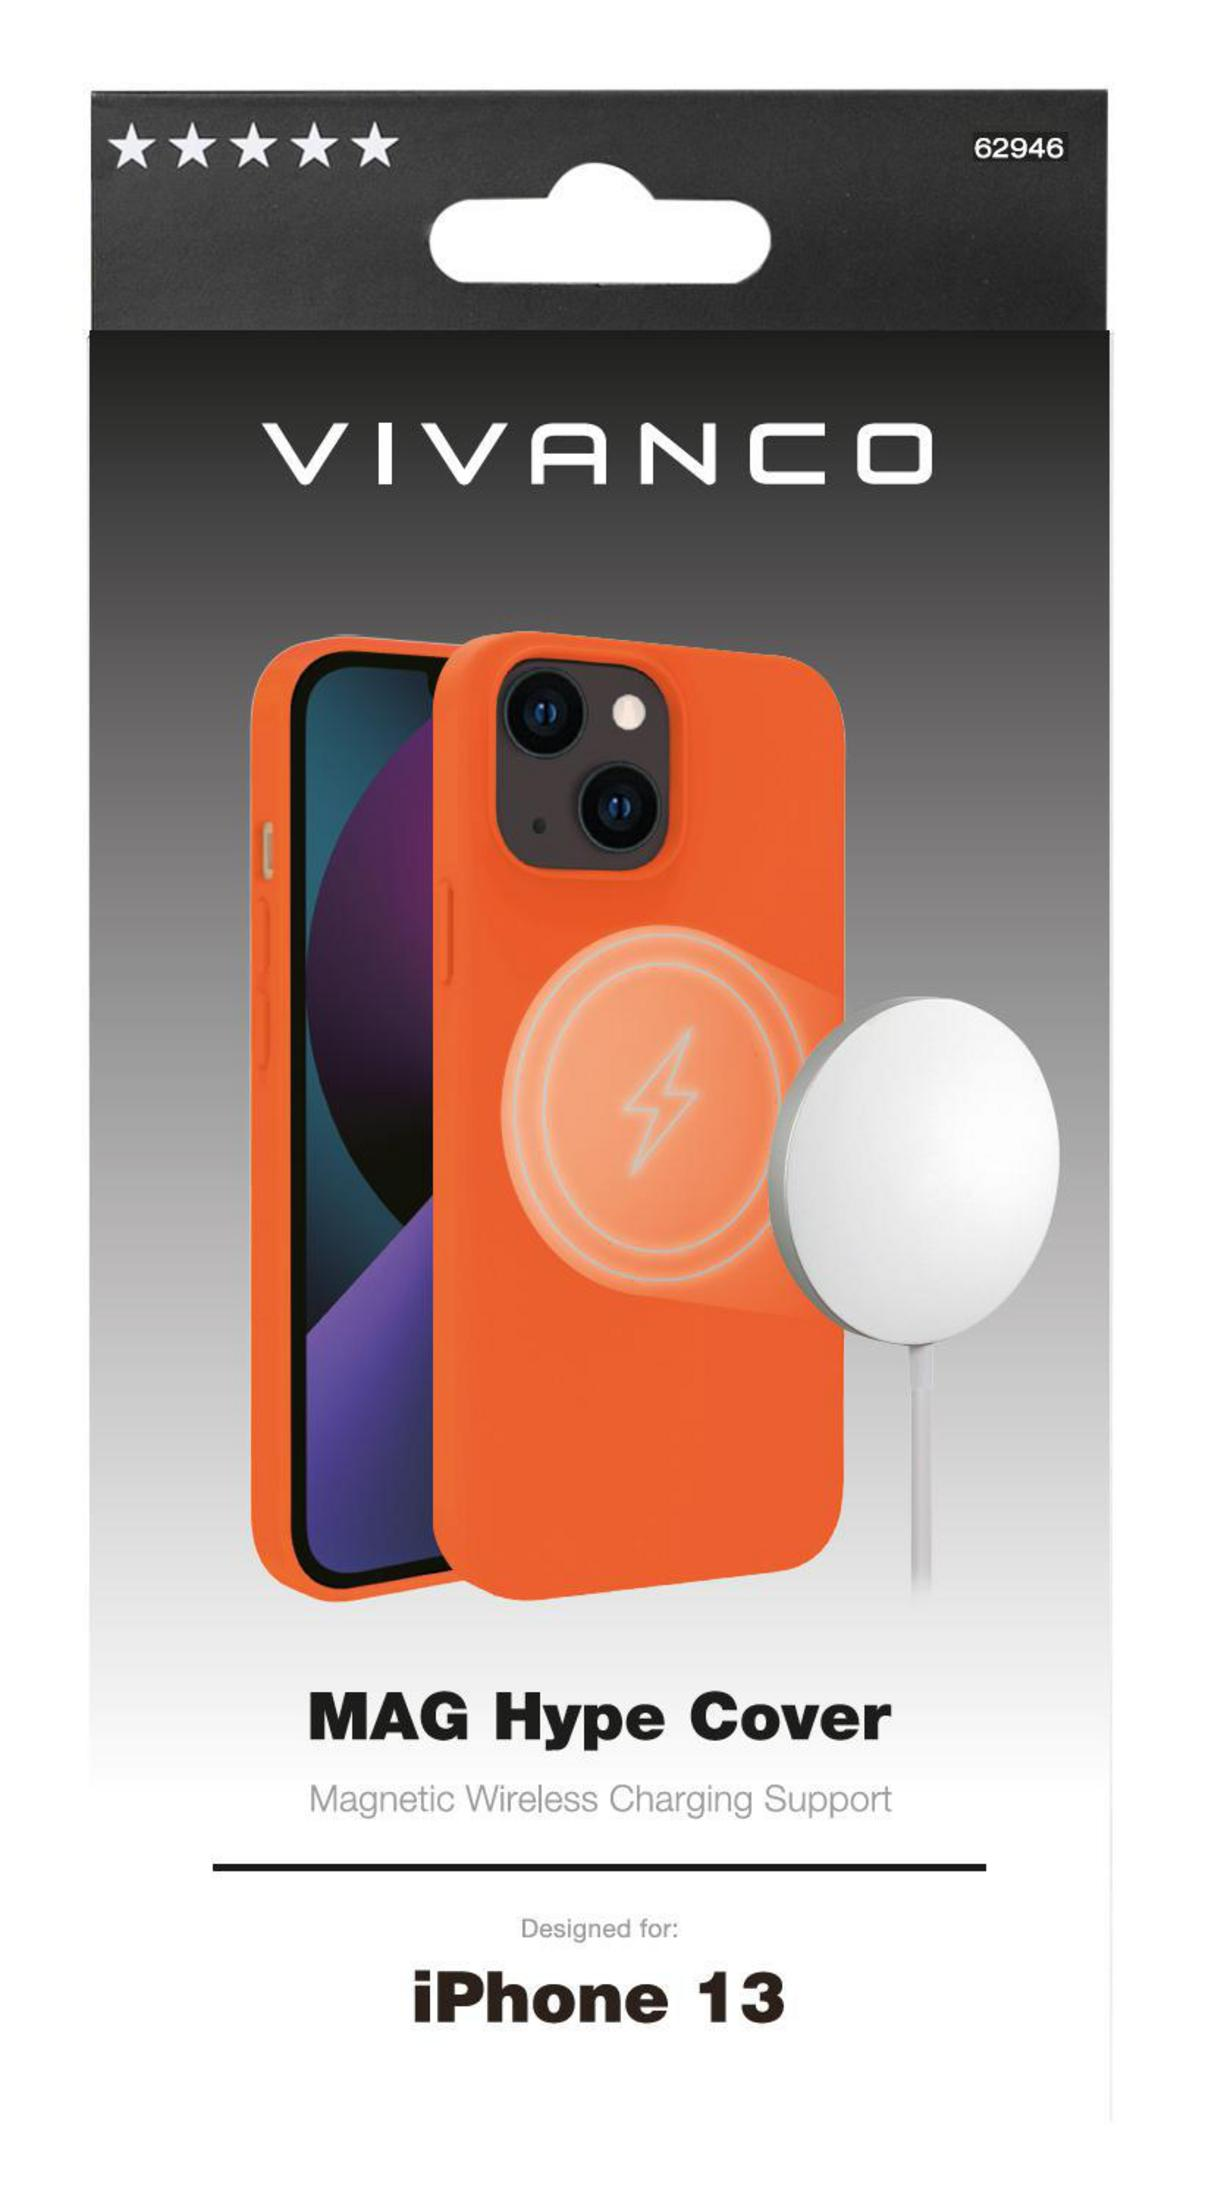 COVER Backcover, Orange Apple, 62946 VIVANCO OR, 13, IPH13 MAGHYPE iPhone